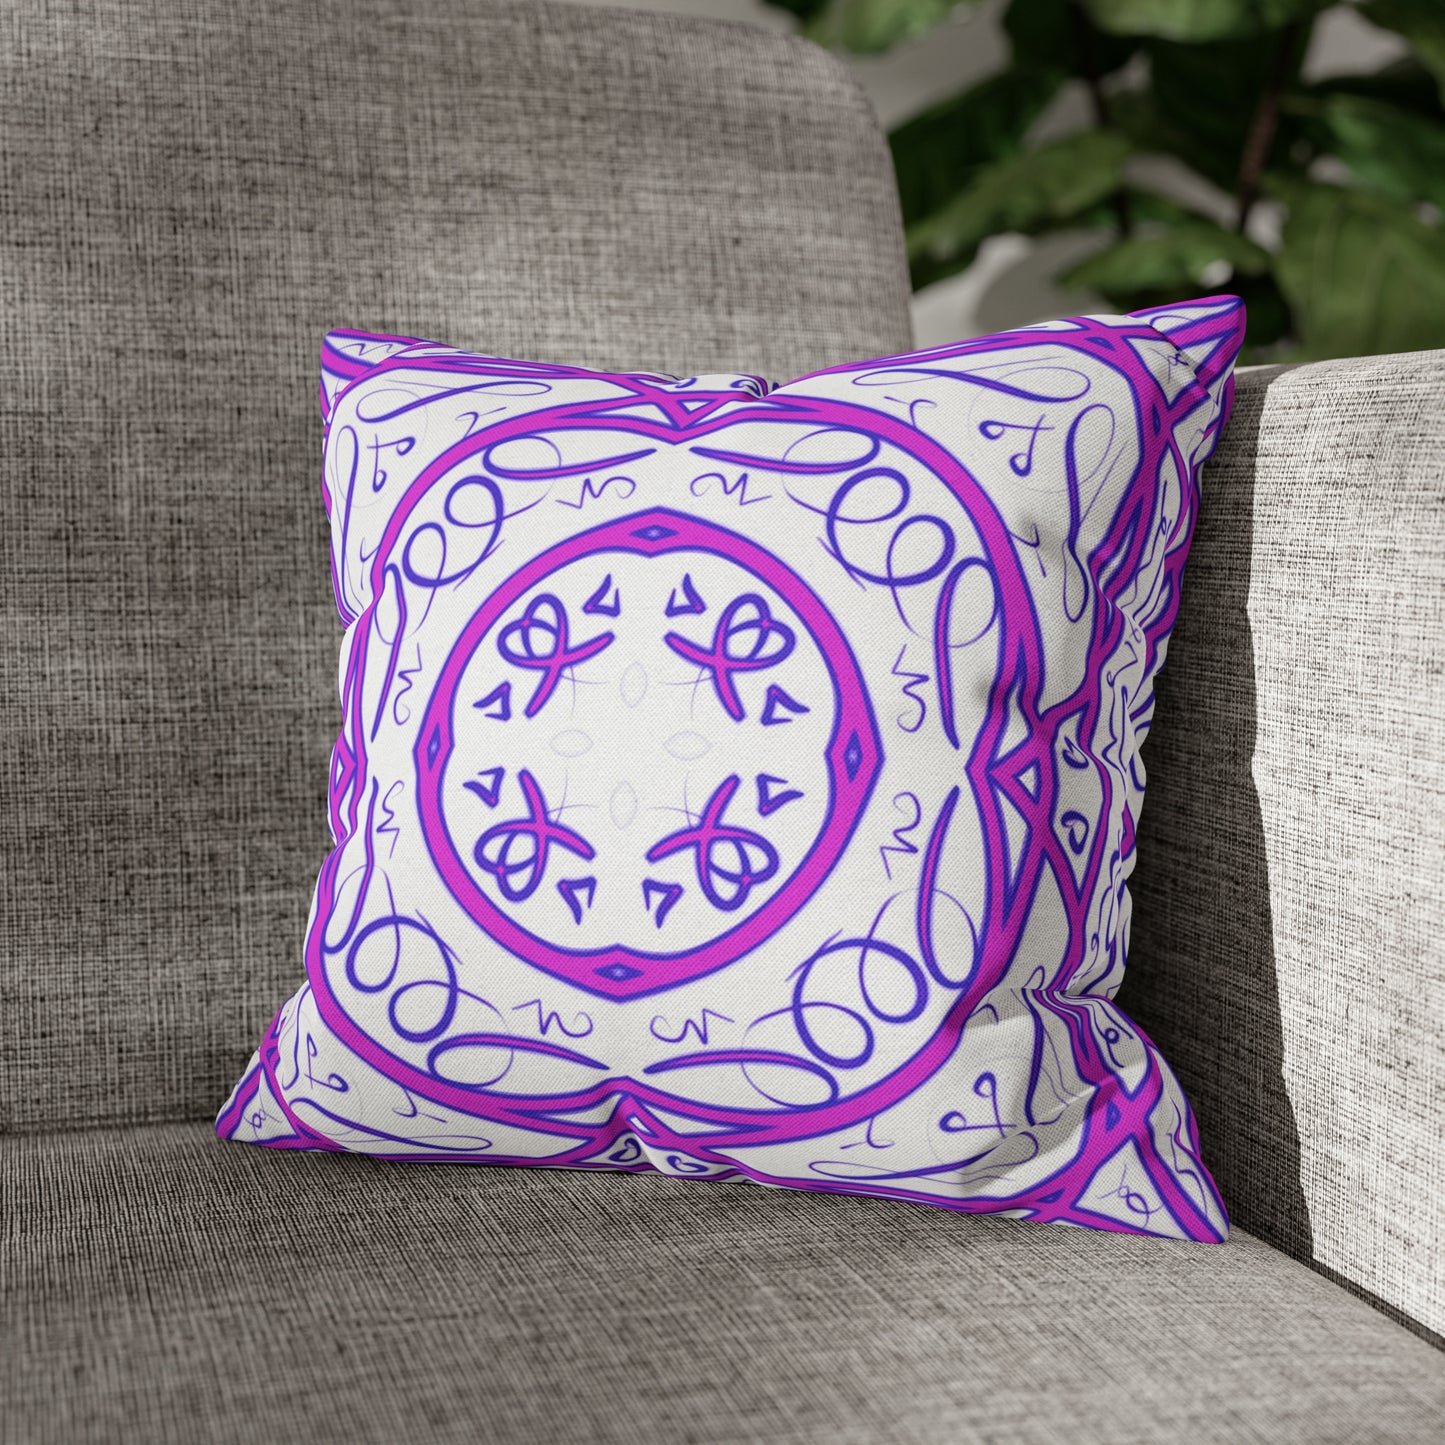 Spiritual Connection Language Square Pillowcase - Energetic Home Decor - Cosmic Statement Piece - High Vibe Home